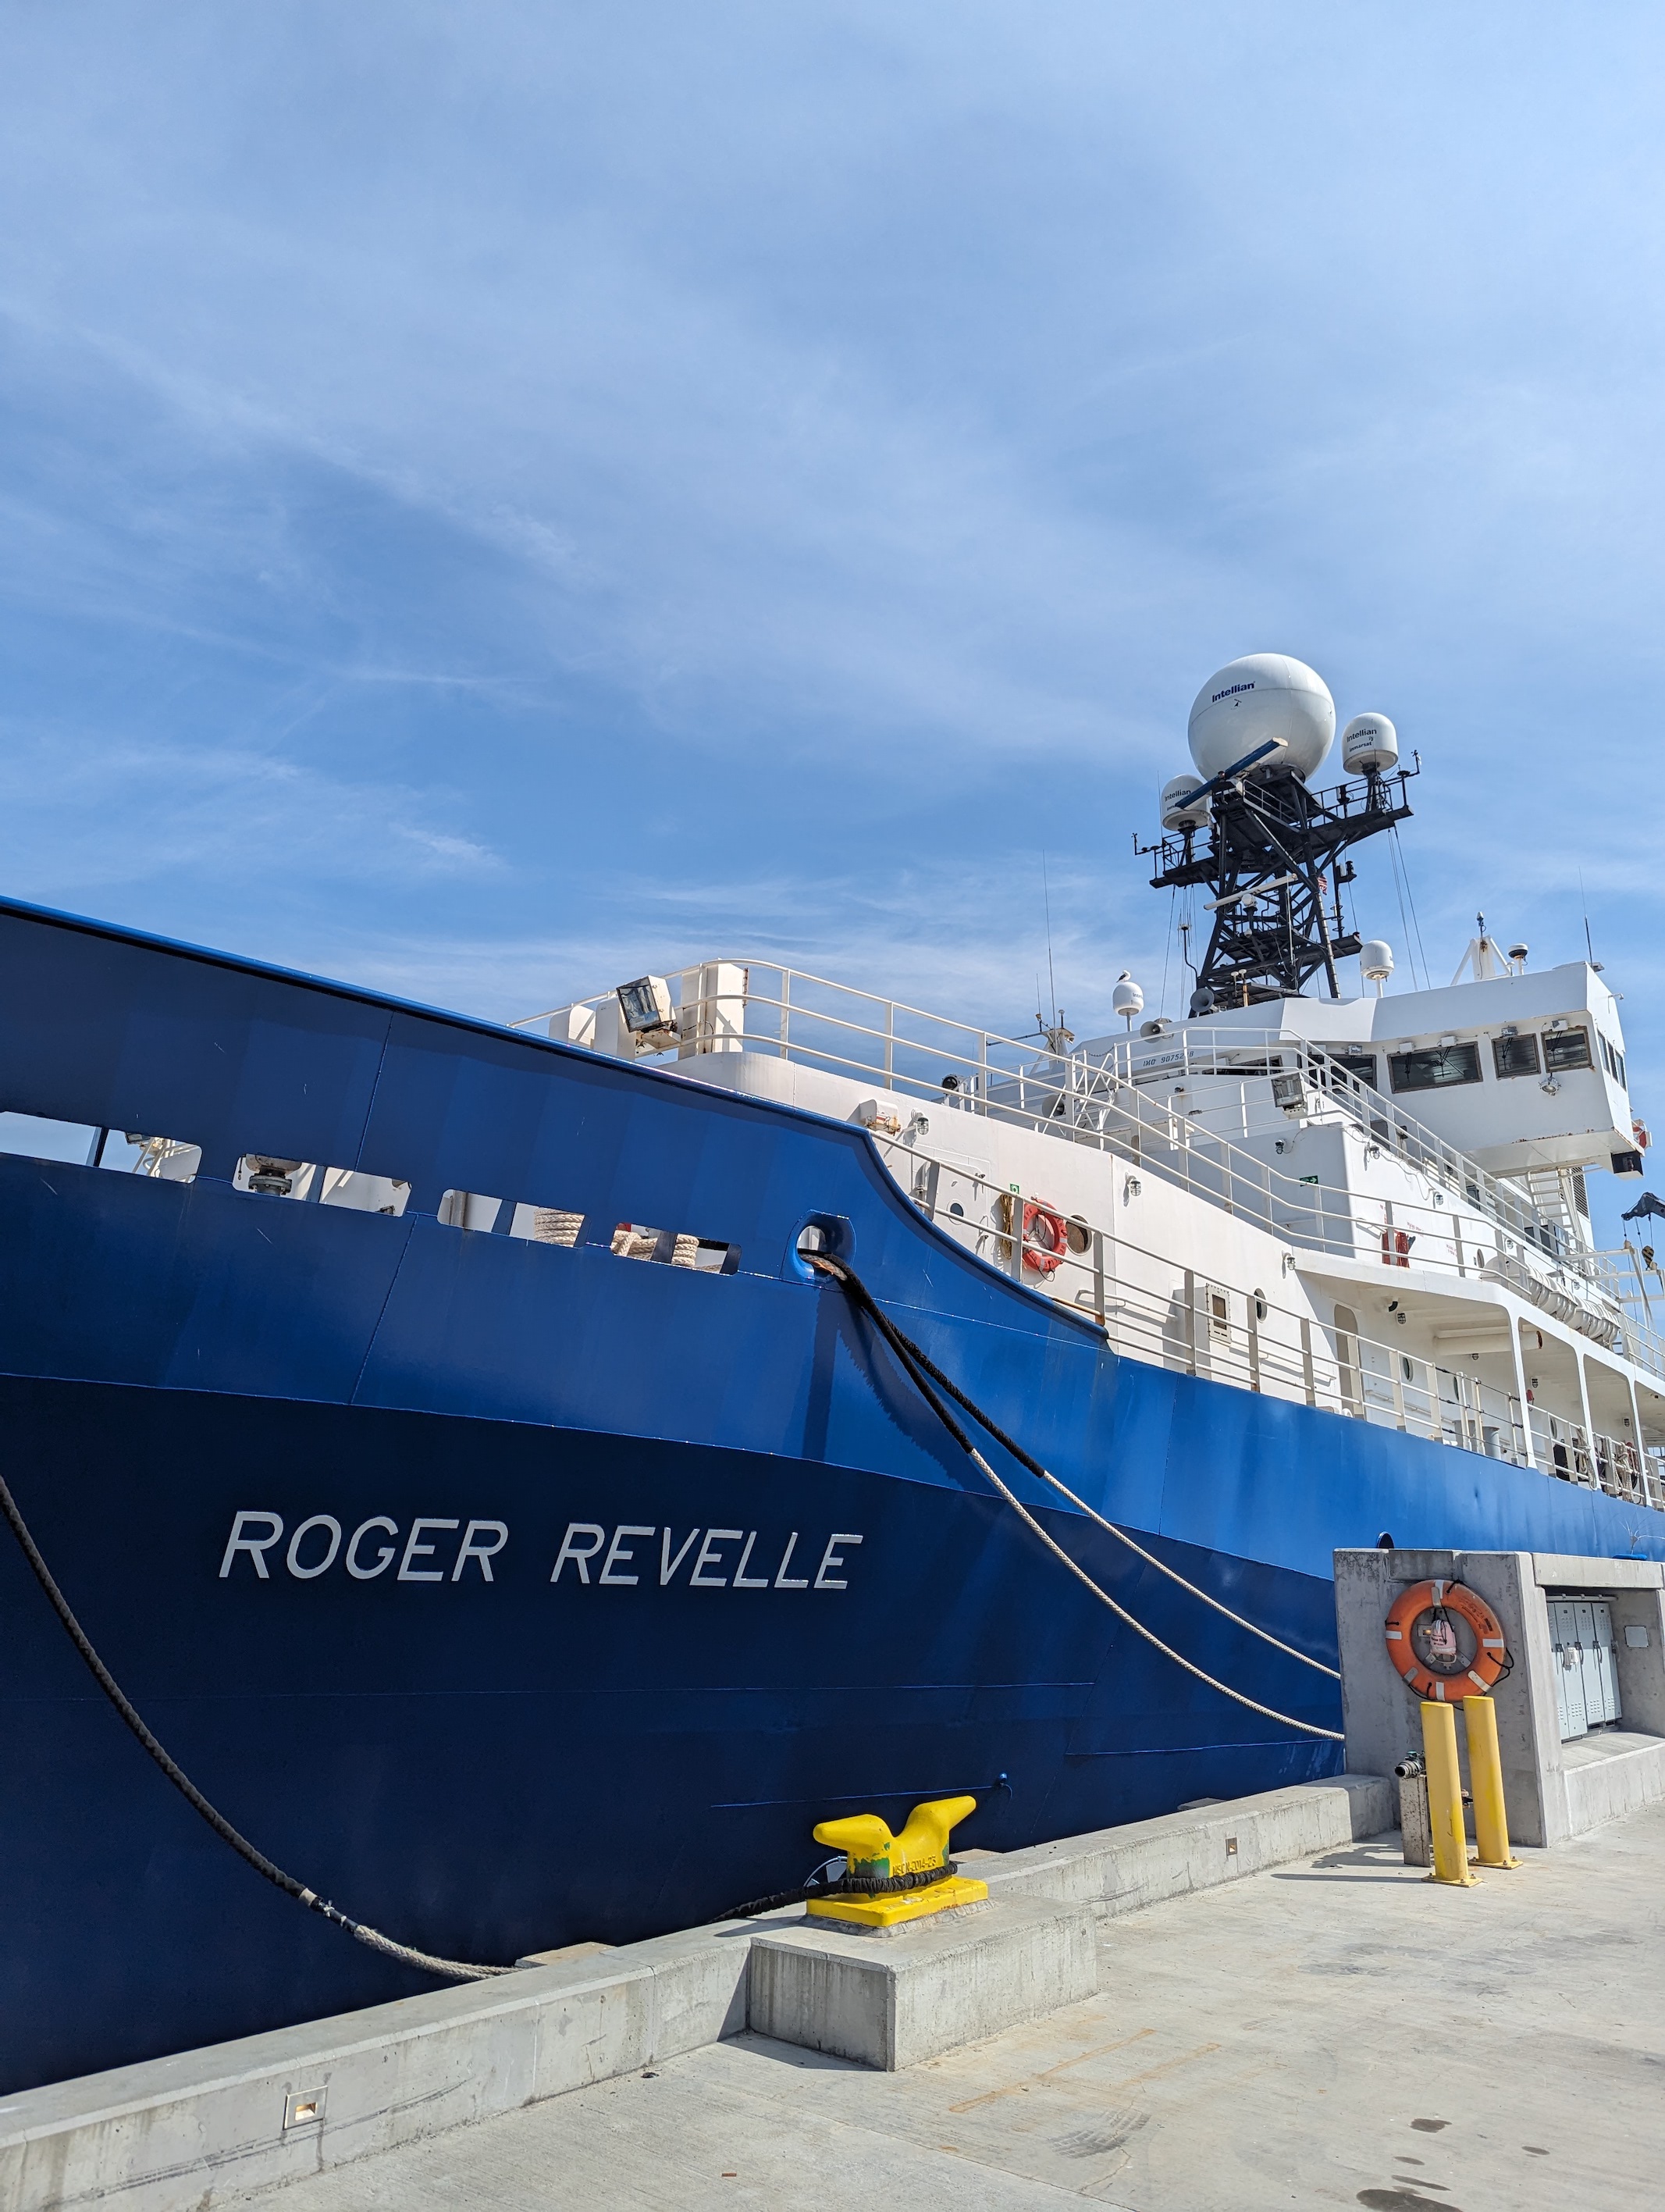 side image of r/v roger revelle, blue-hulled ship with white writing on the side, and assorted scientific instruments on top.